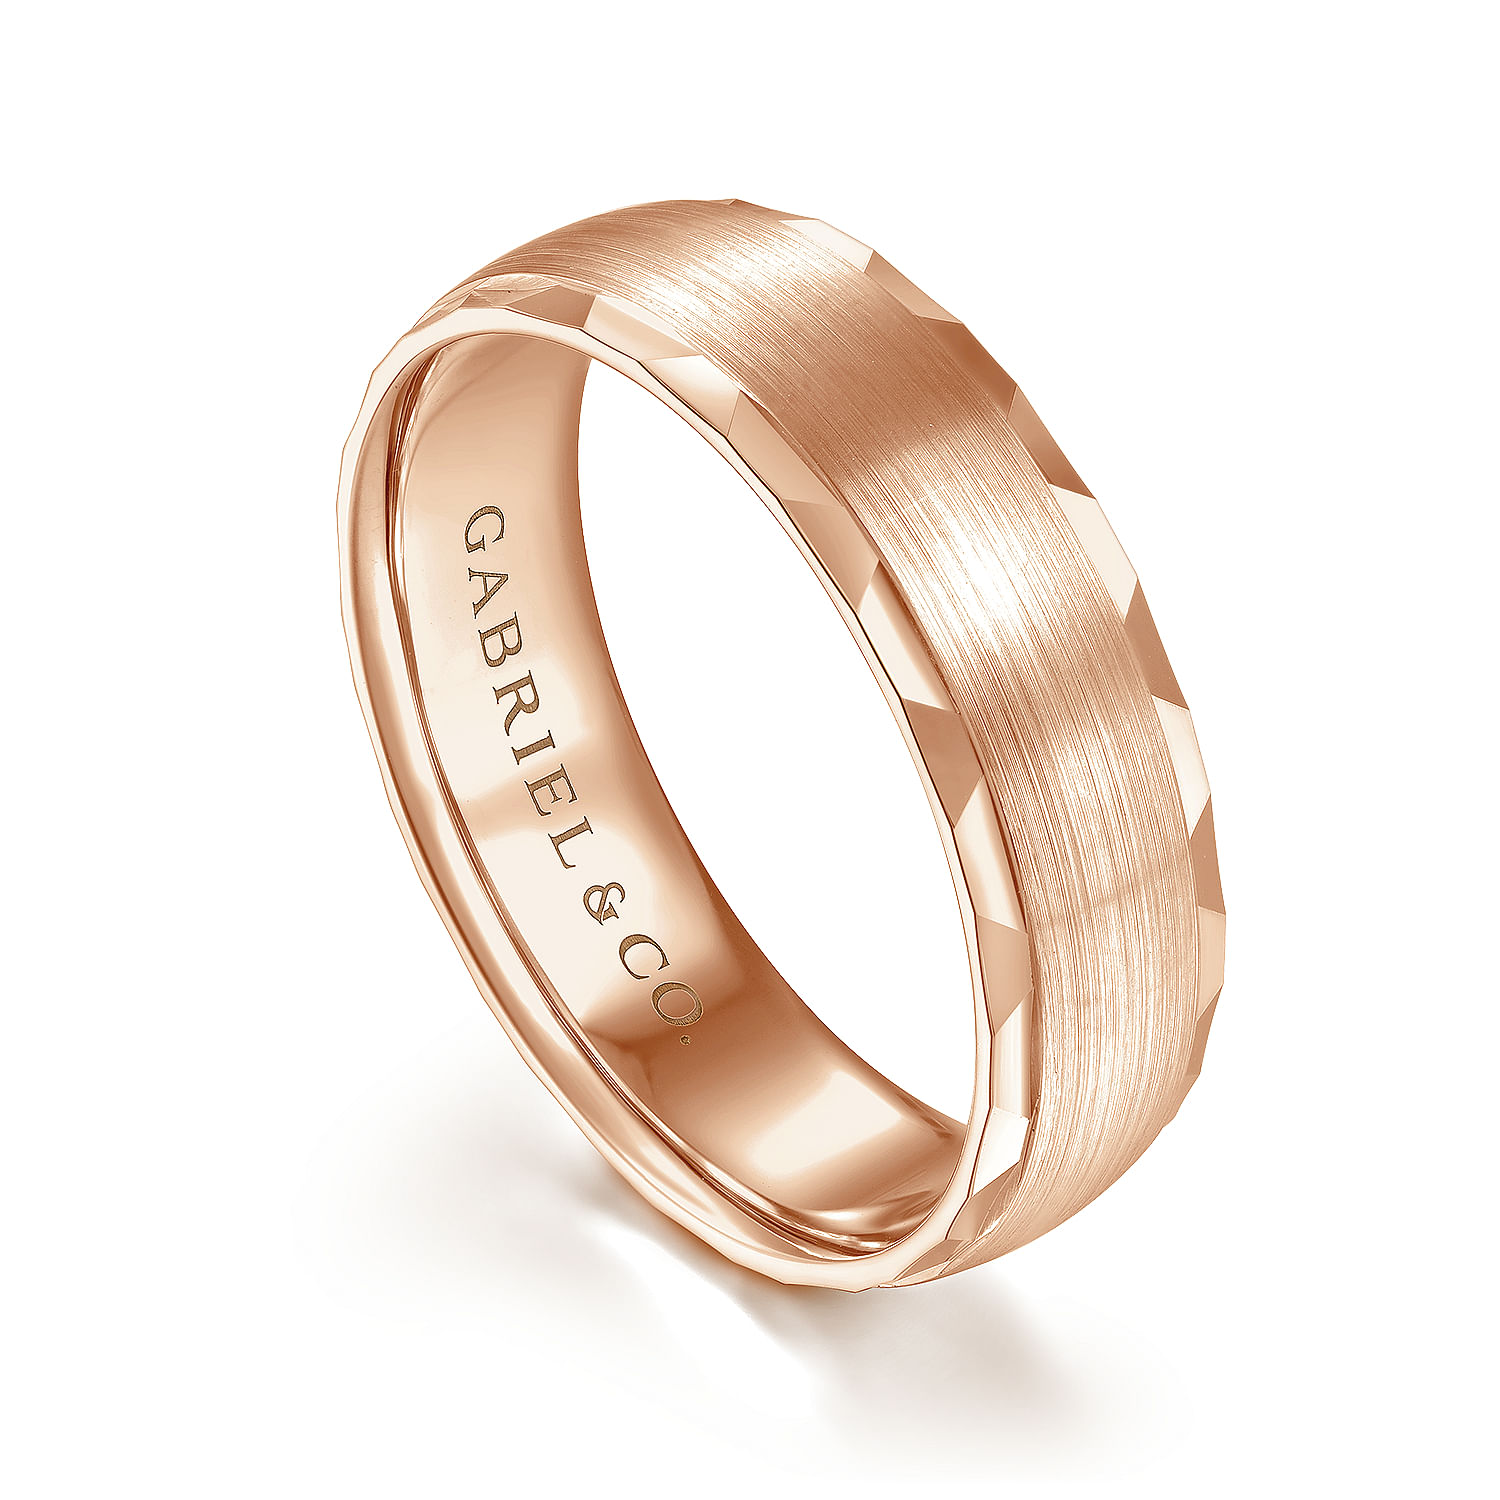 14K Rose Gold 6mm - Satin Finish Men's Wedding Band with Carved Edge